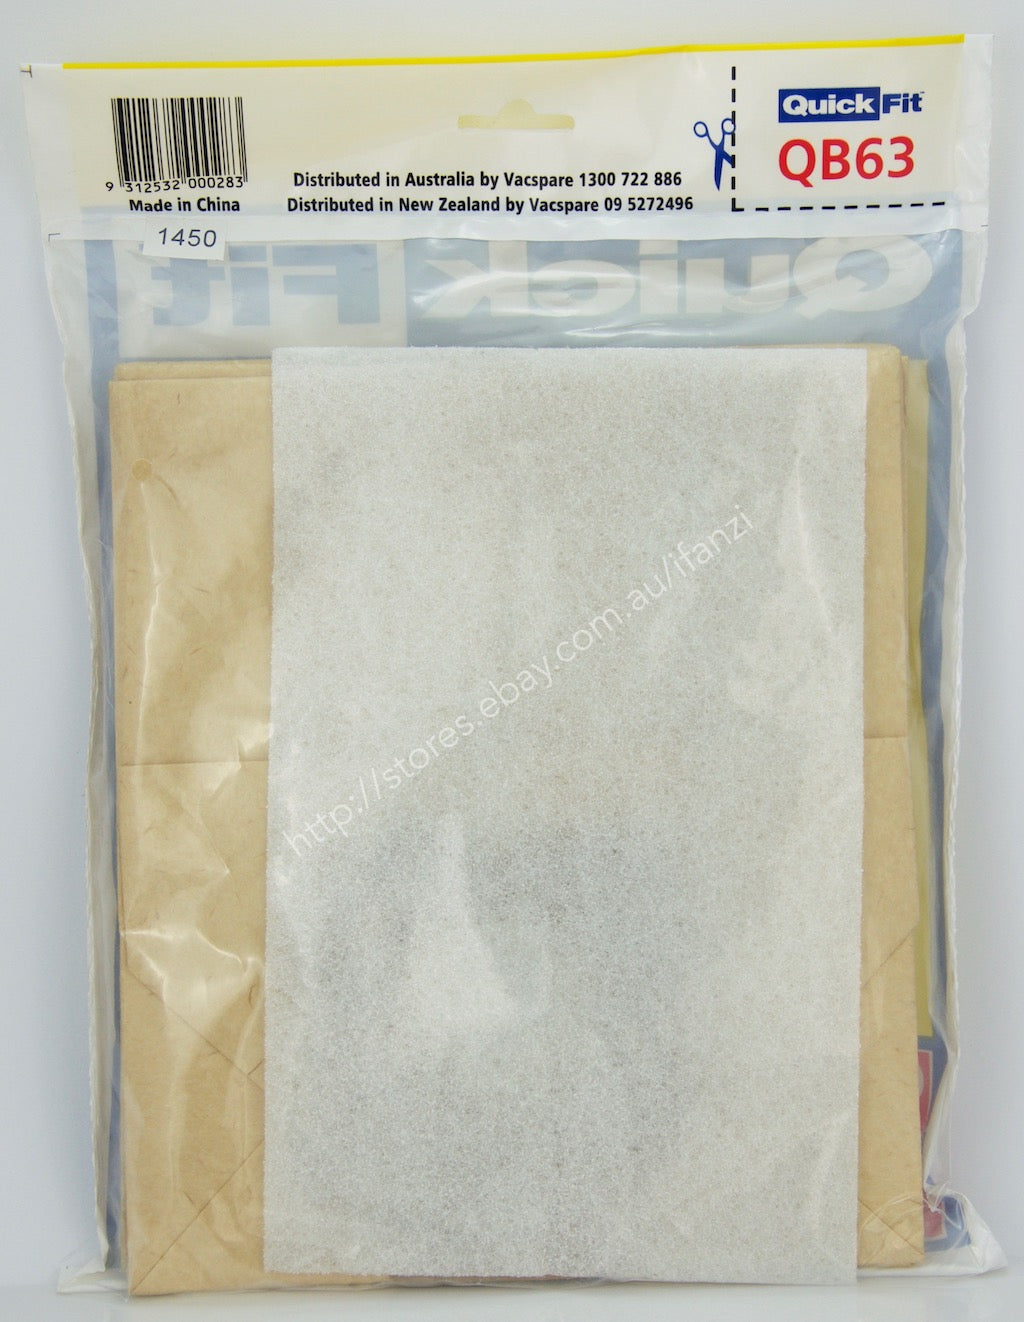 QuickFit Vacuum Cleaner Bags For Panasonic 5 Bags Included Plus Filter QB63